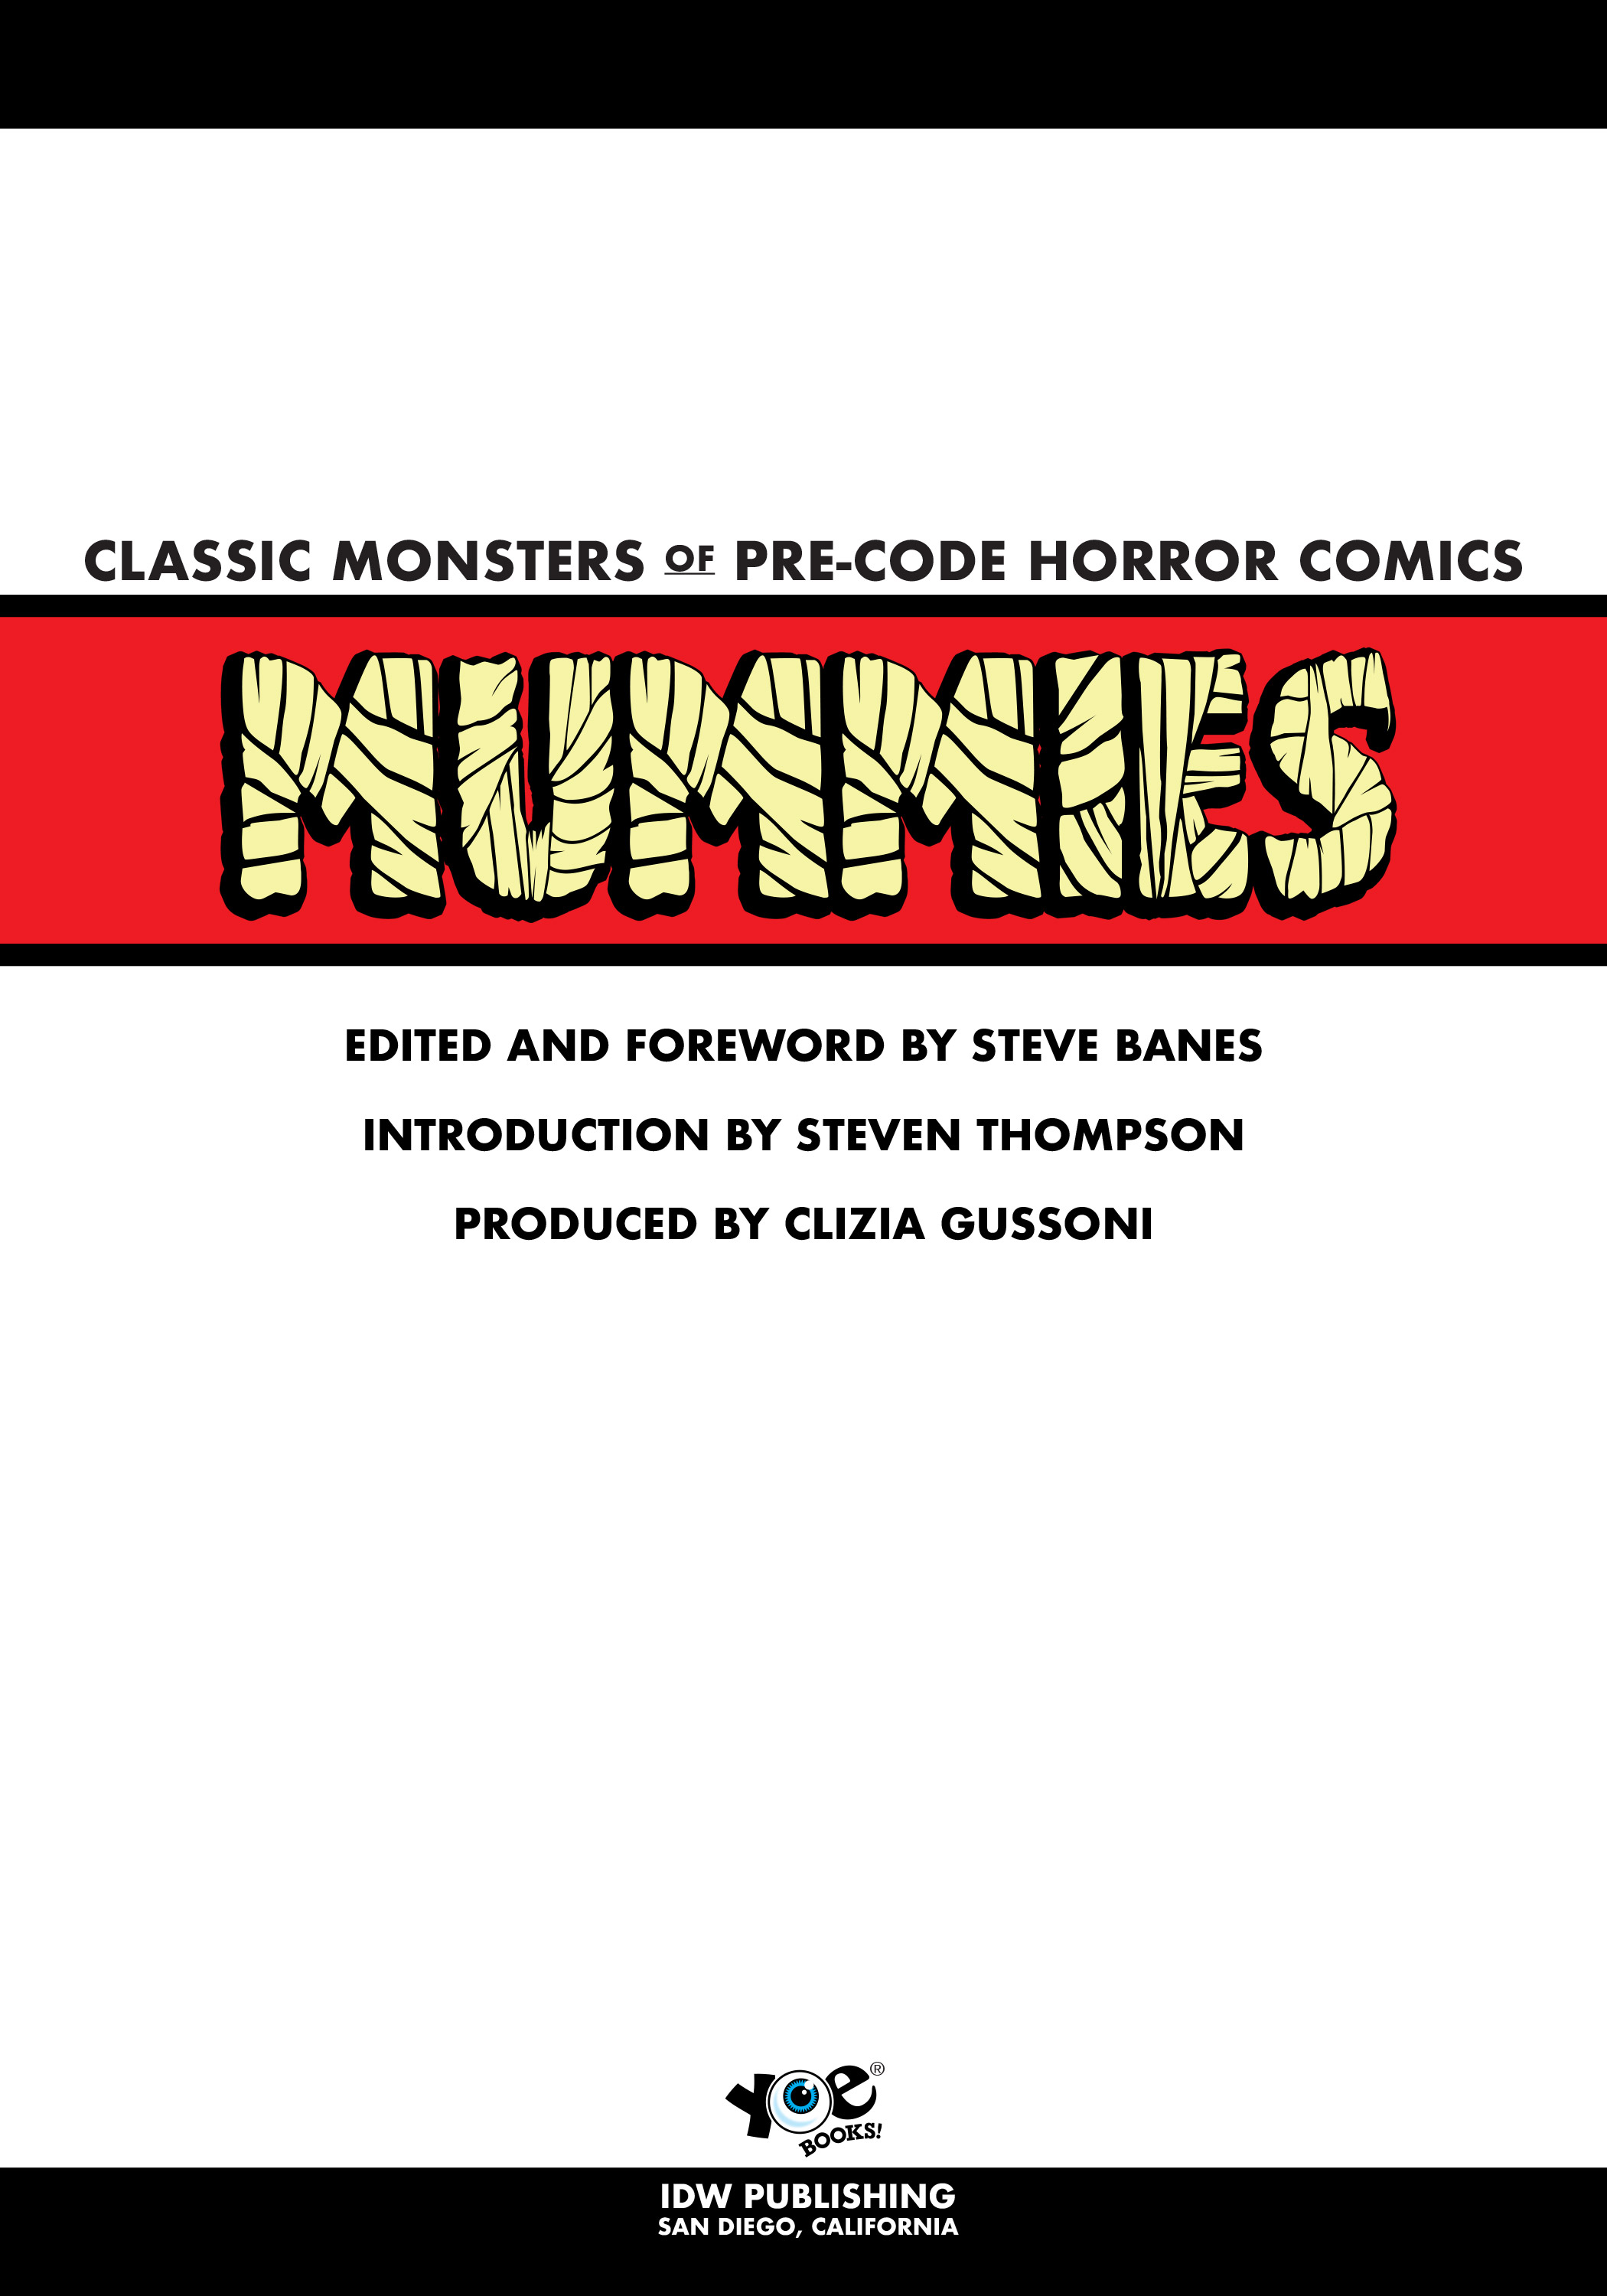 Read online Classic Monsters of Pre-Code Horror Comics: Mummies comic -  Issue # TPB - 2